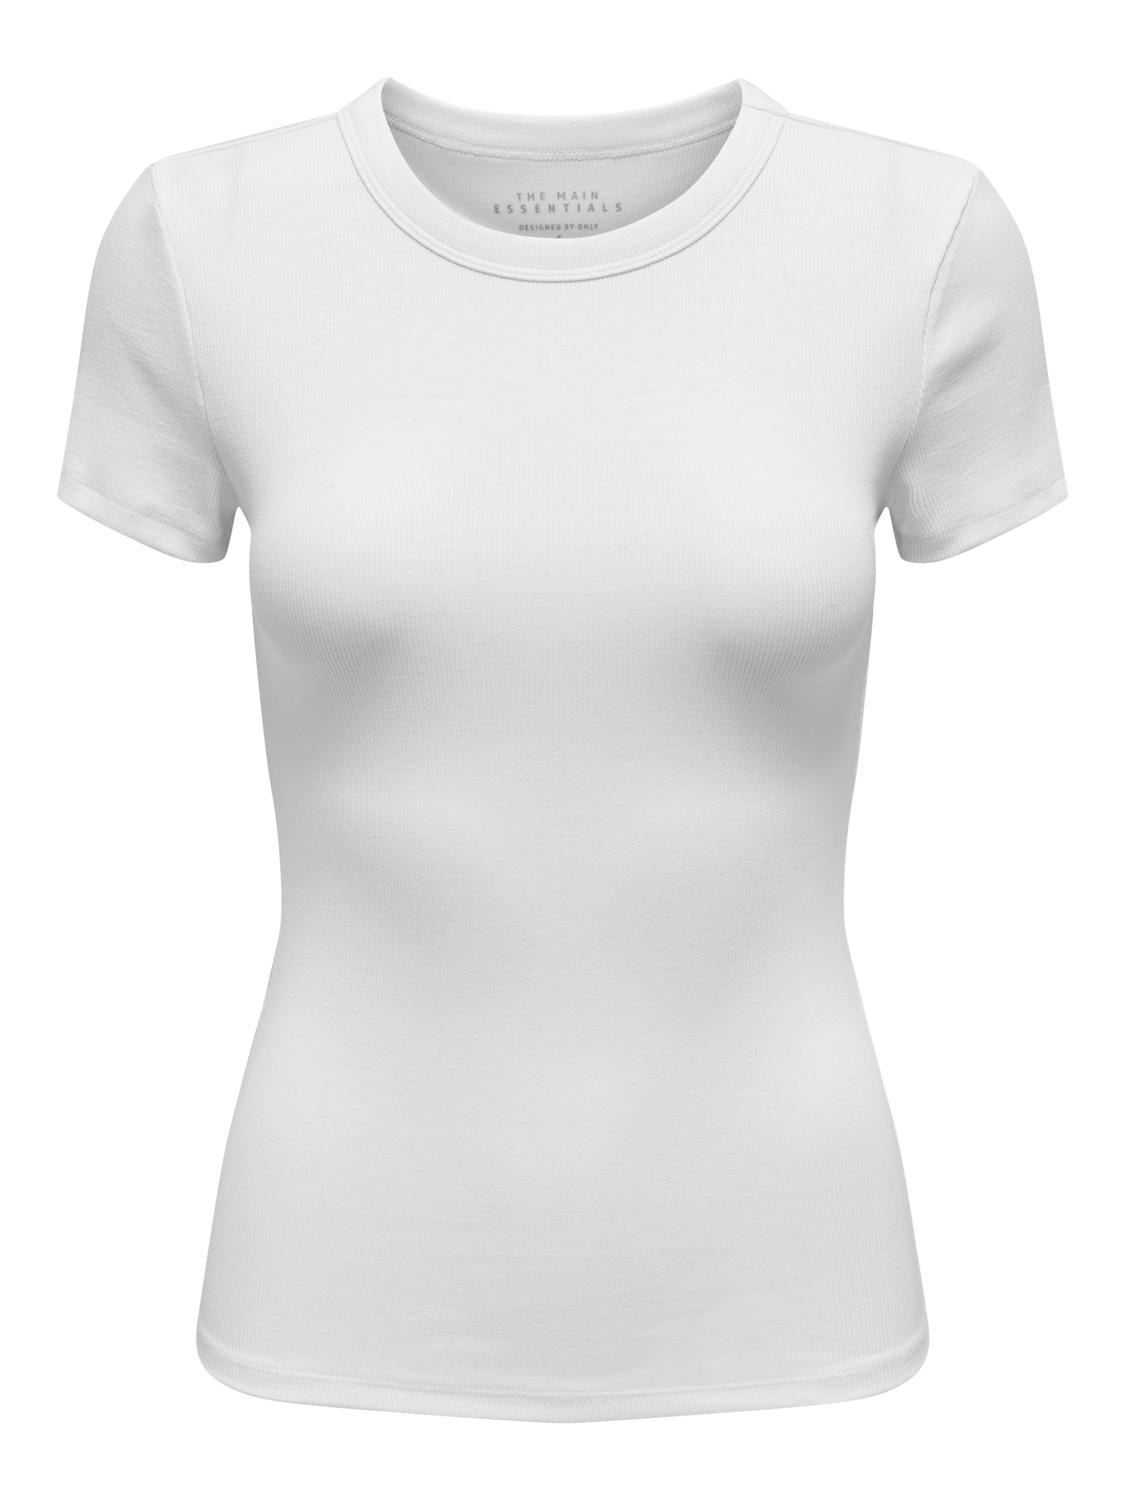 ONLY o-neck top -Bright White - 15330639